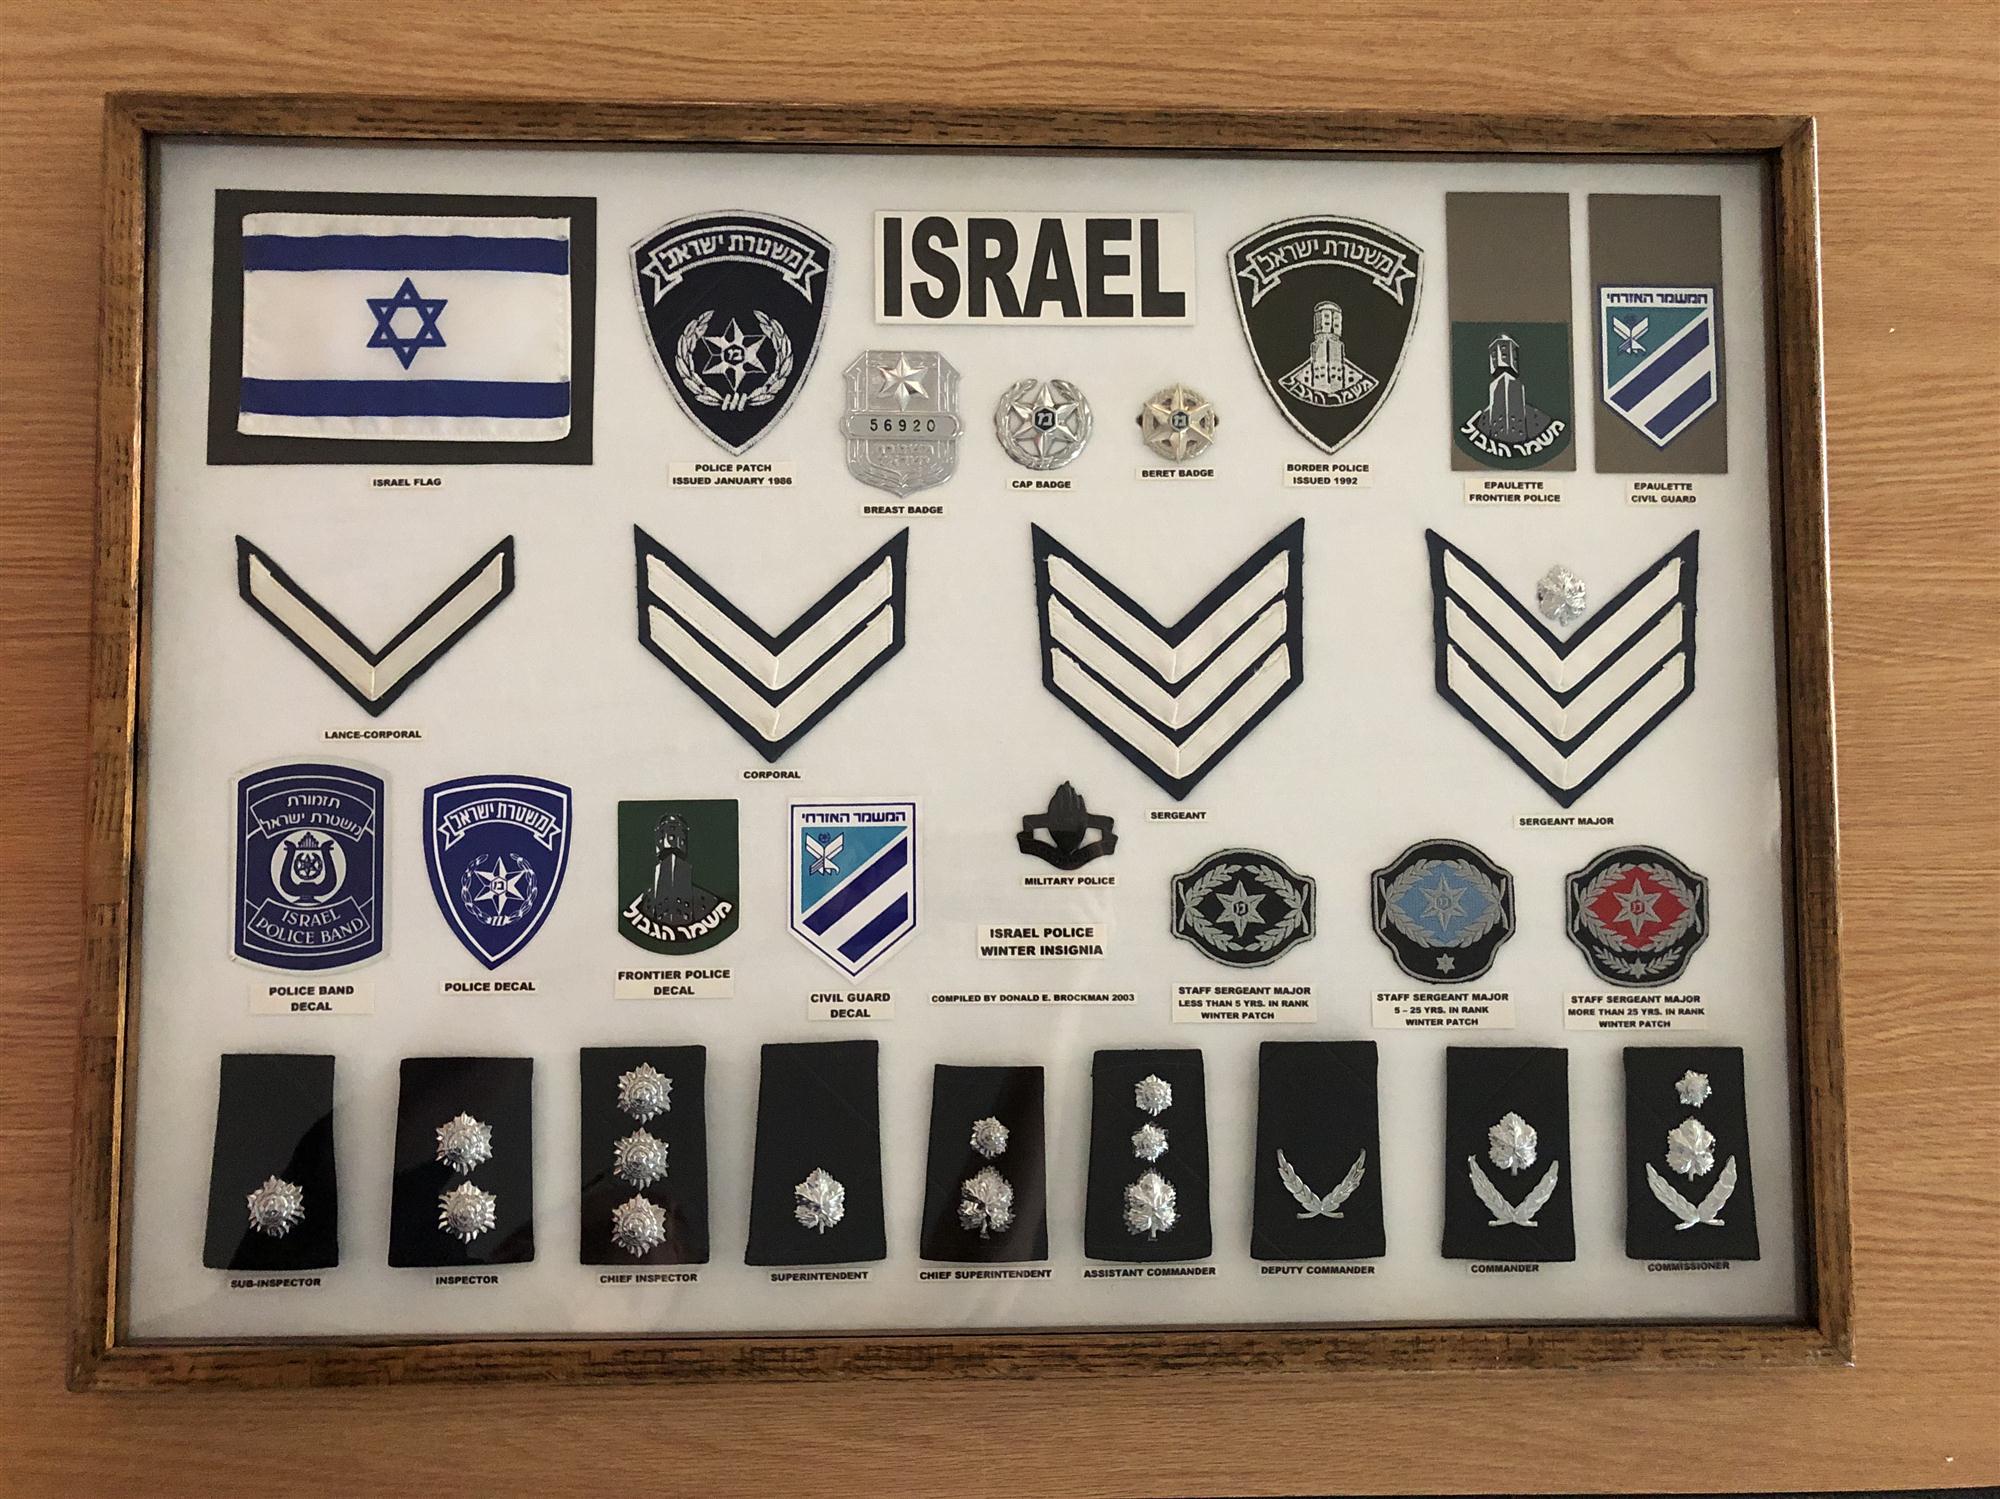 Israel police artifacts